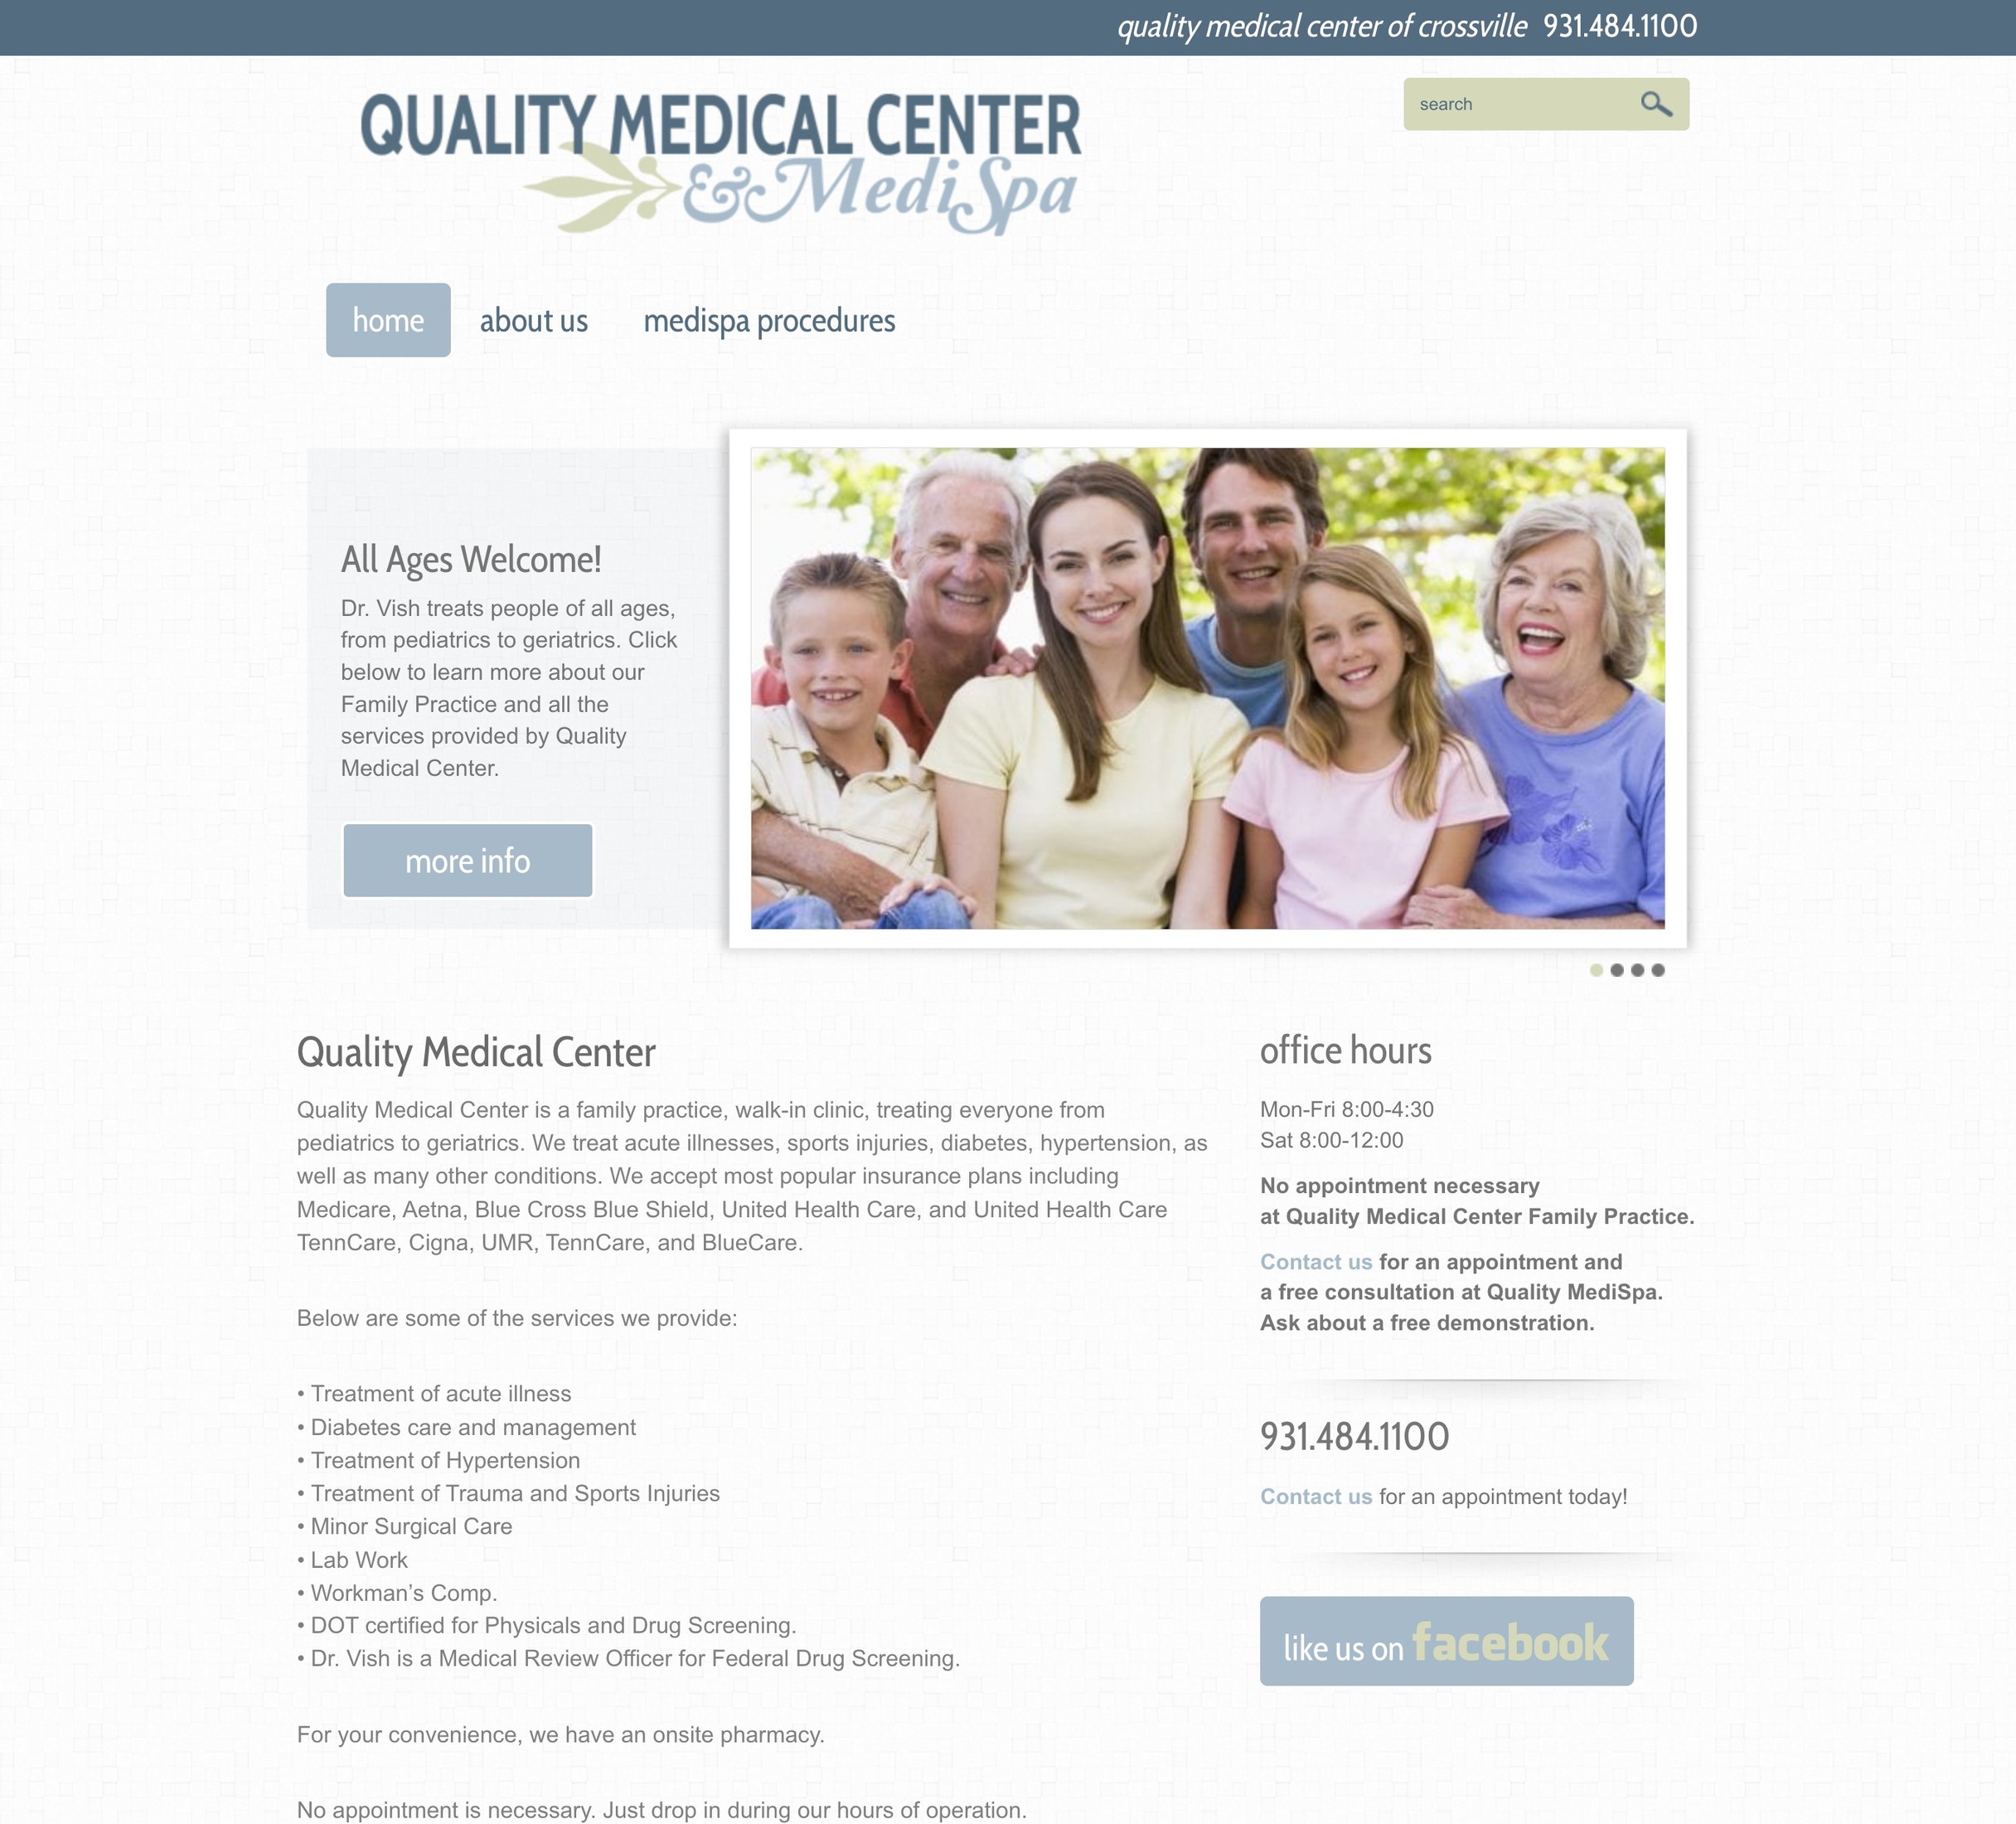 Quality Medical Center of Crossville